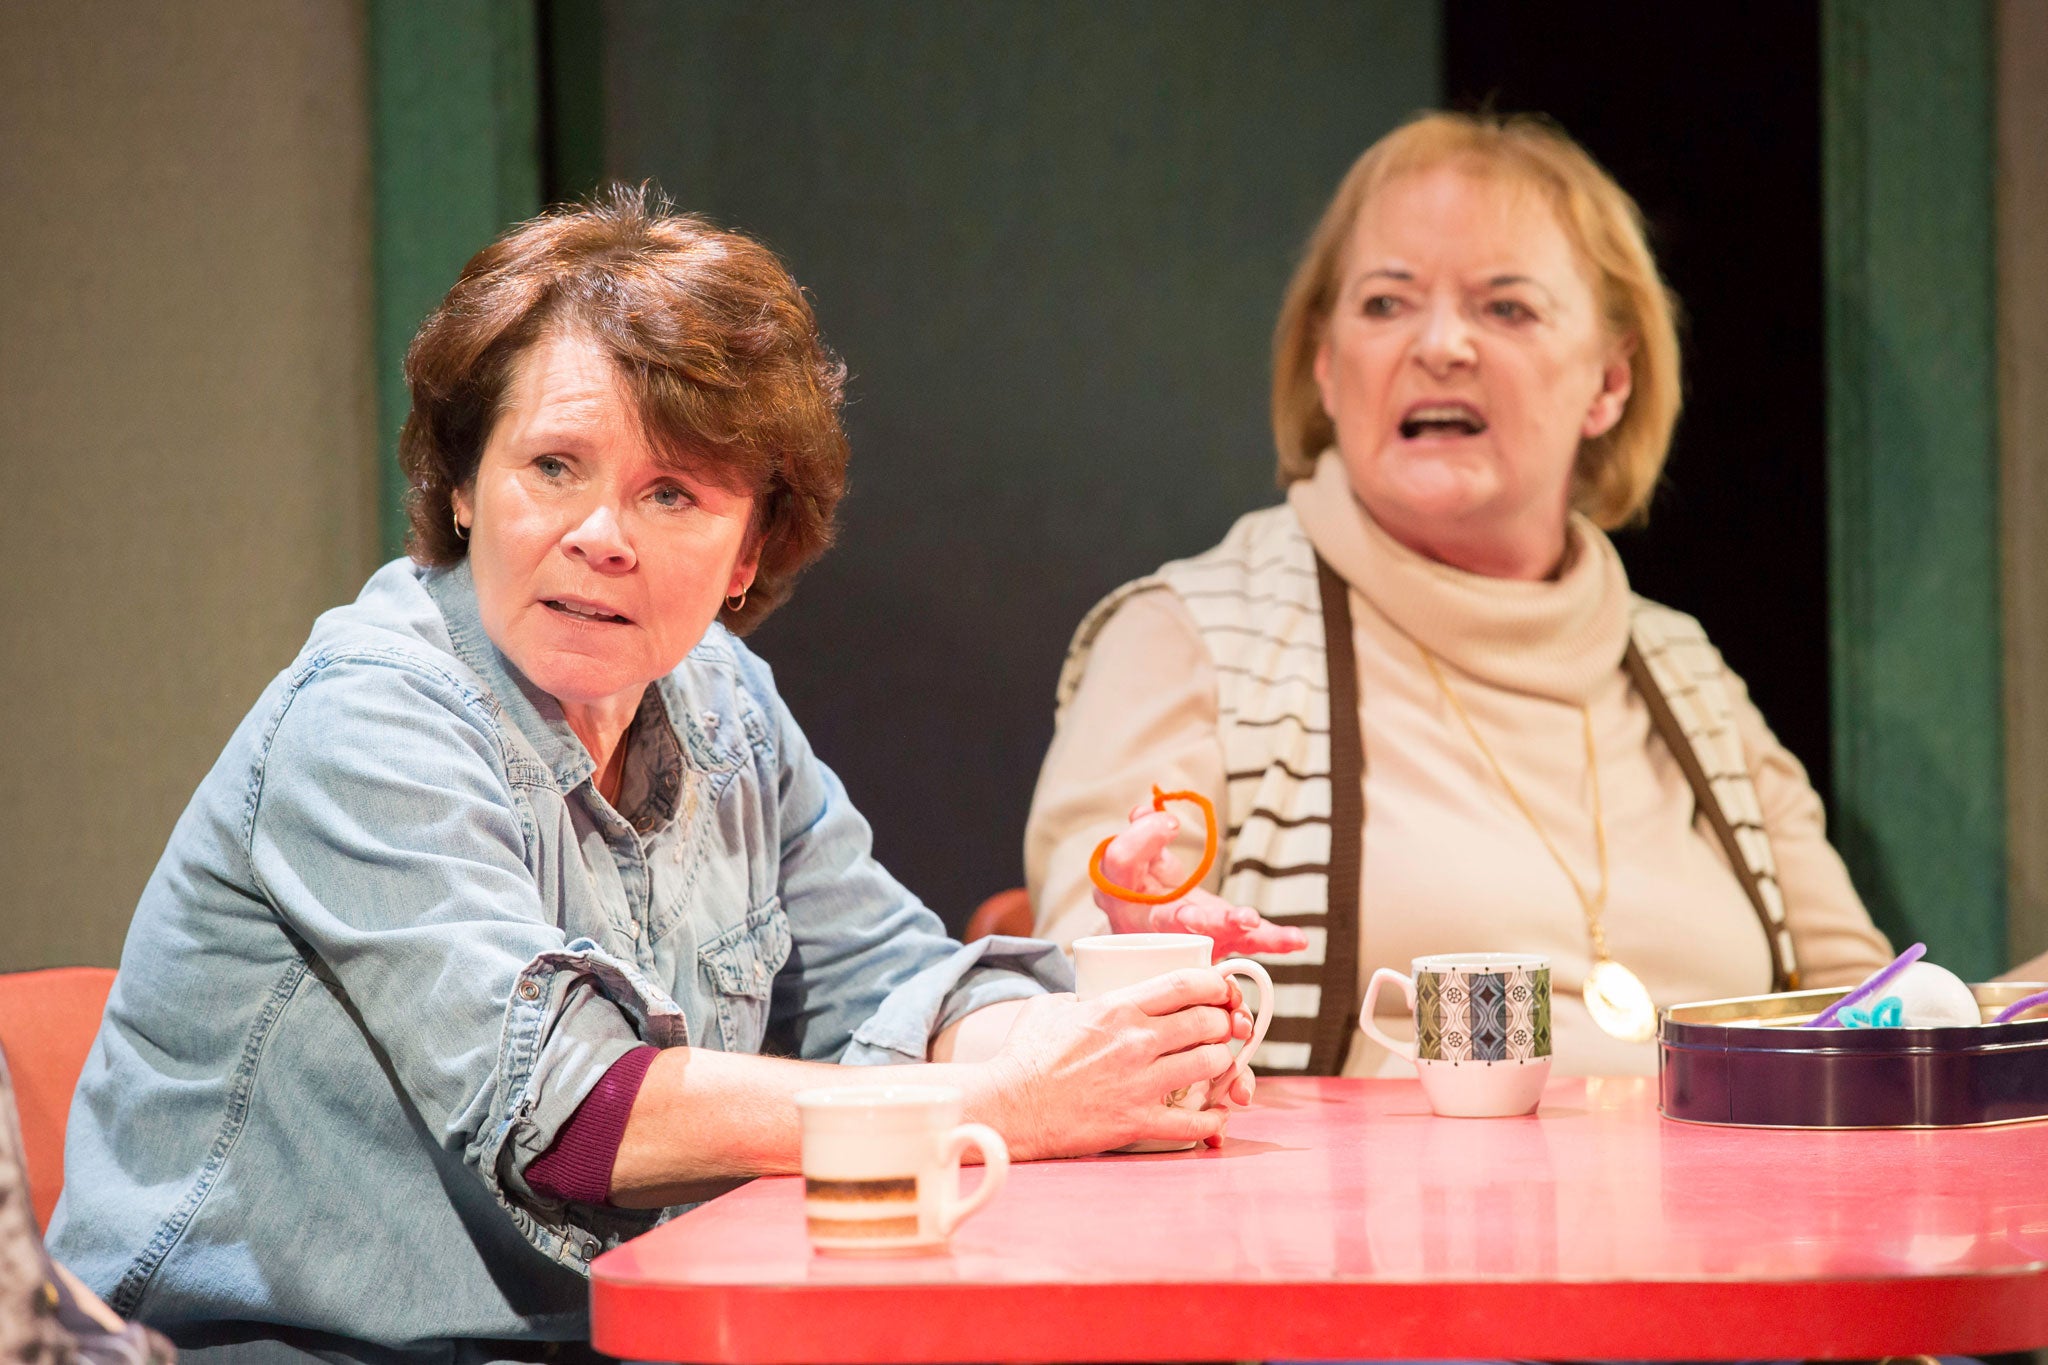 Good People, theatre review: Imelda Staunton magnificent as tough single mother